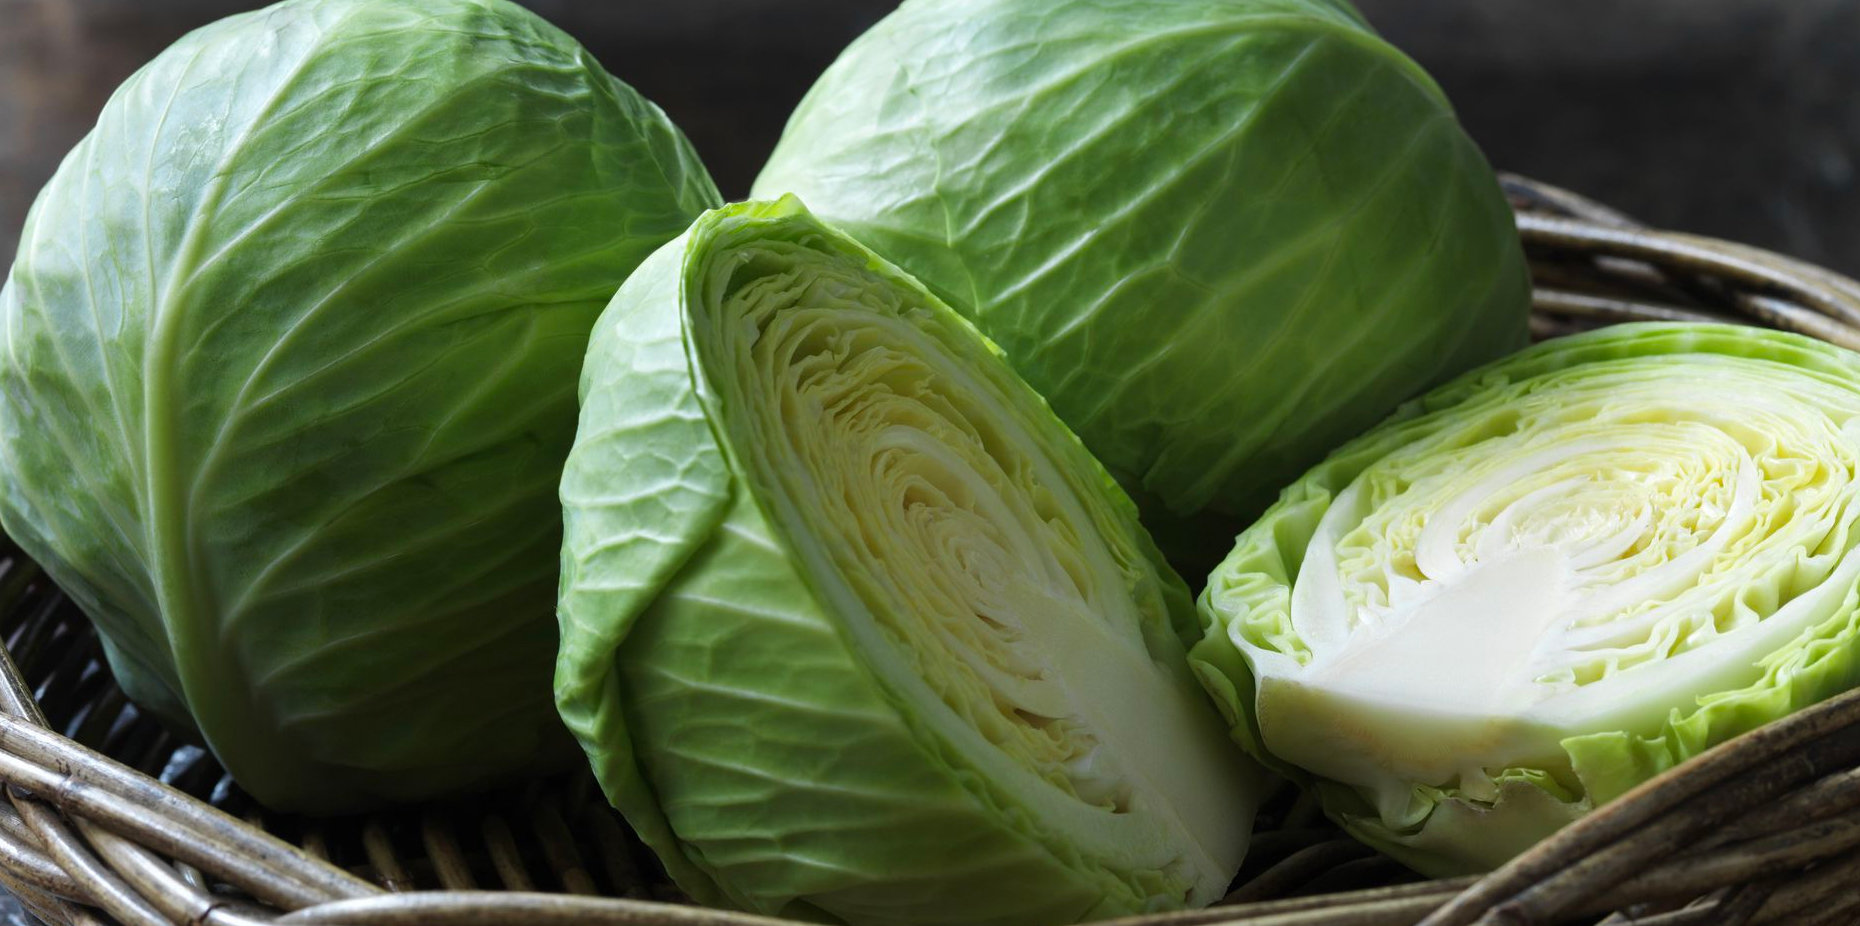 Cabbage: Facts, Nutrition, Benefits, and More